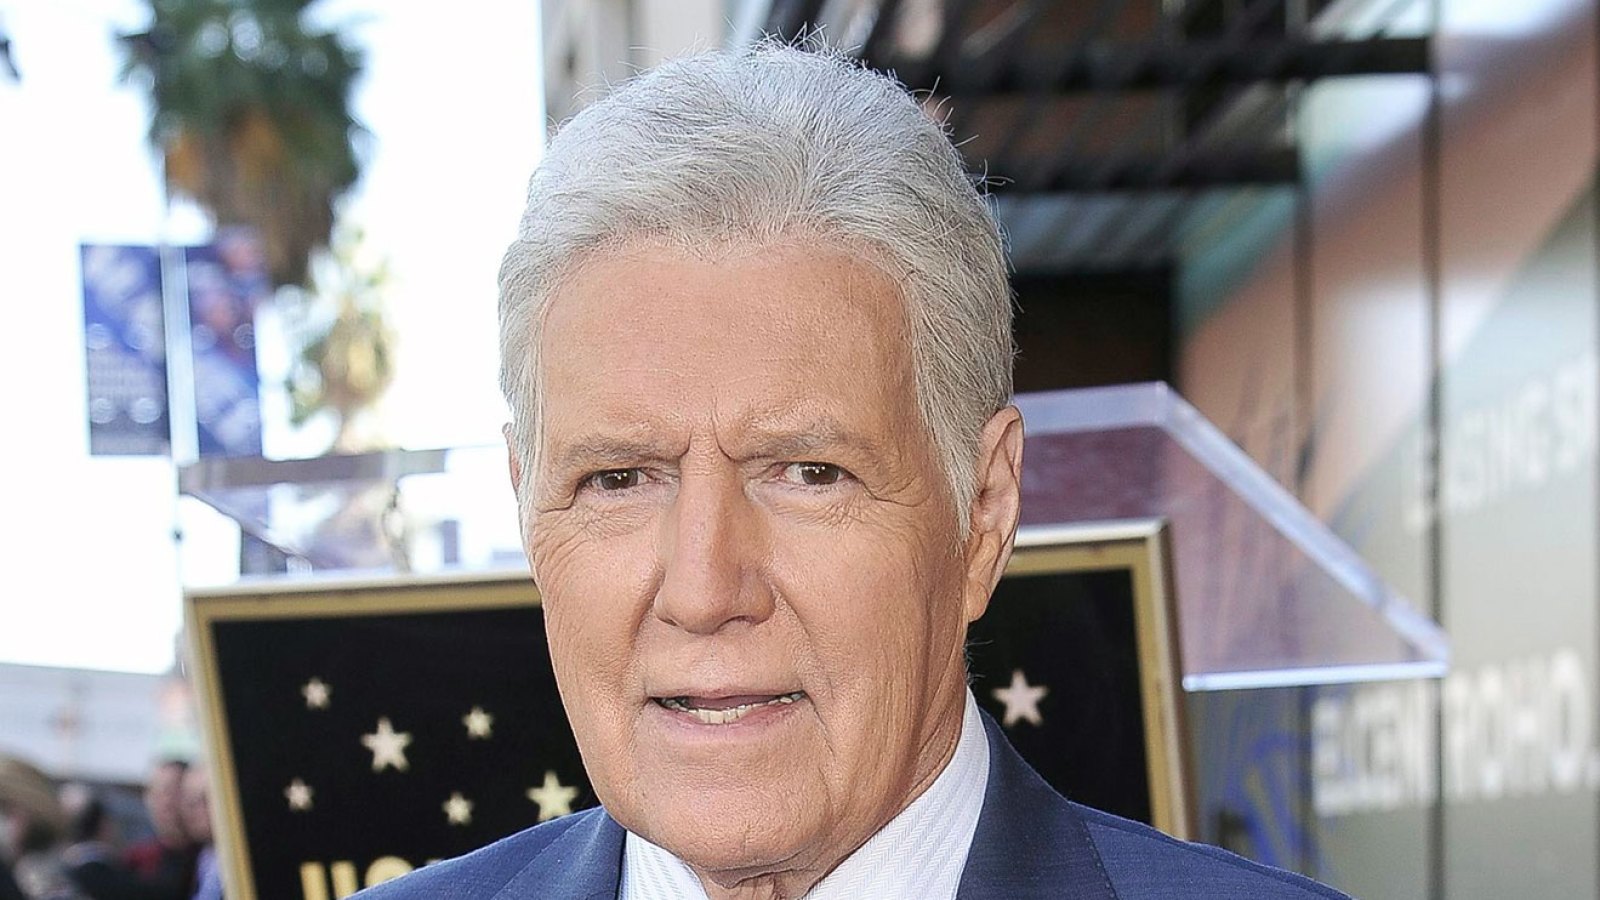 Alex Trebek Shares Hopeful Health Update One Year After Revealing Cancer Diagnosis